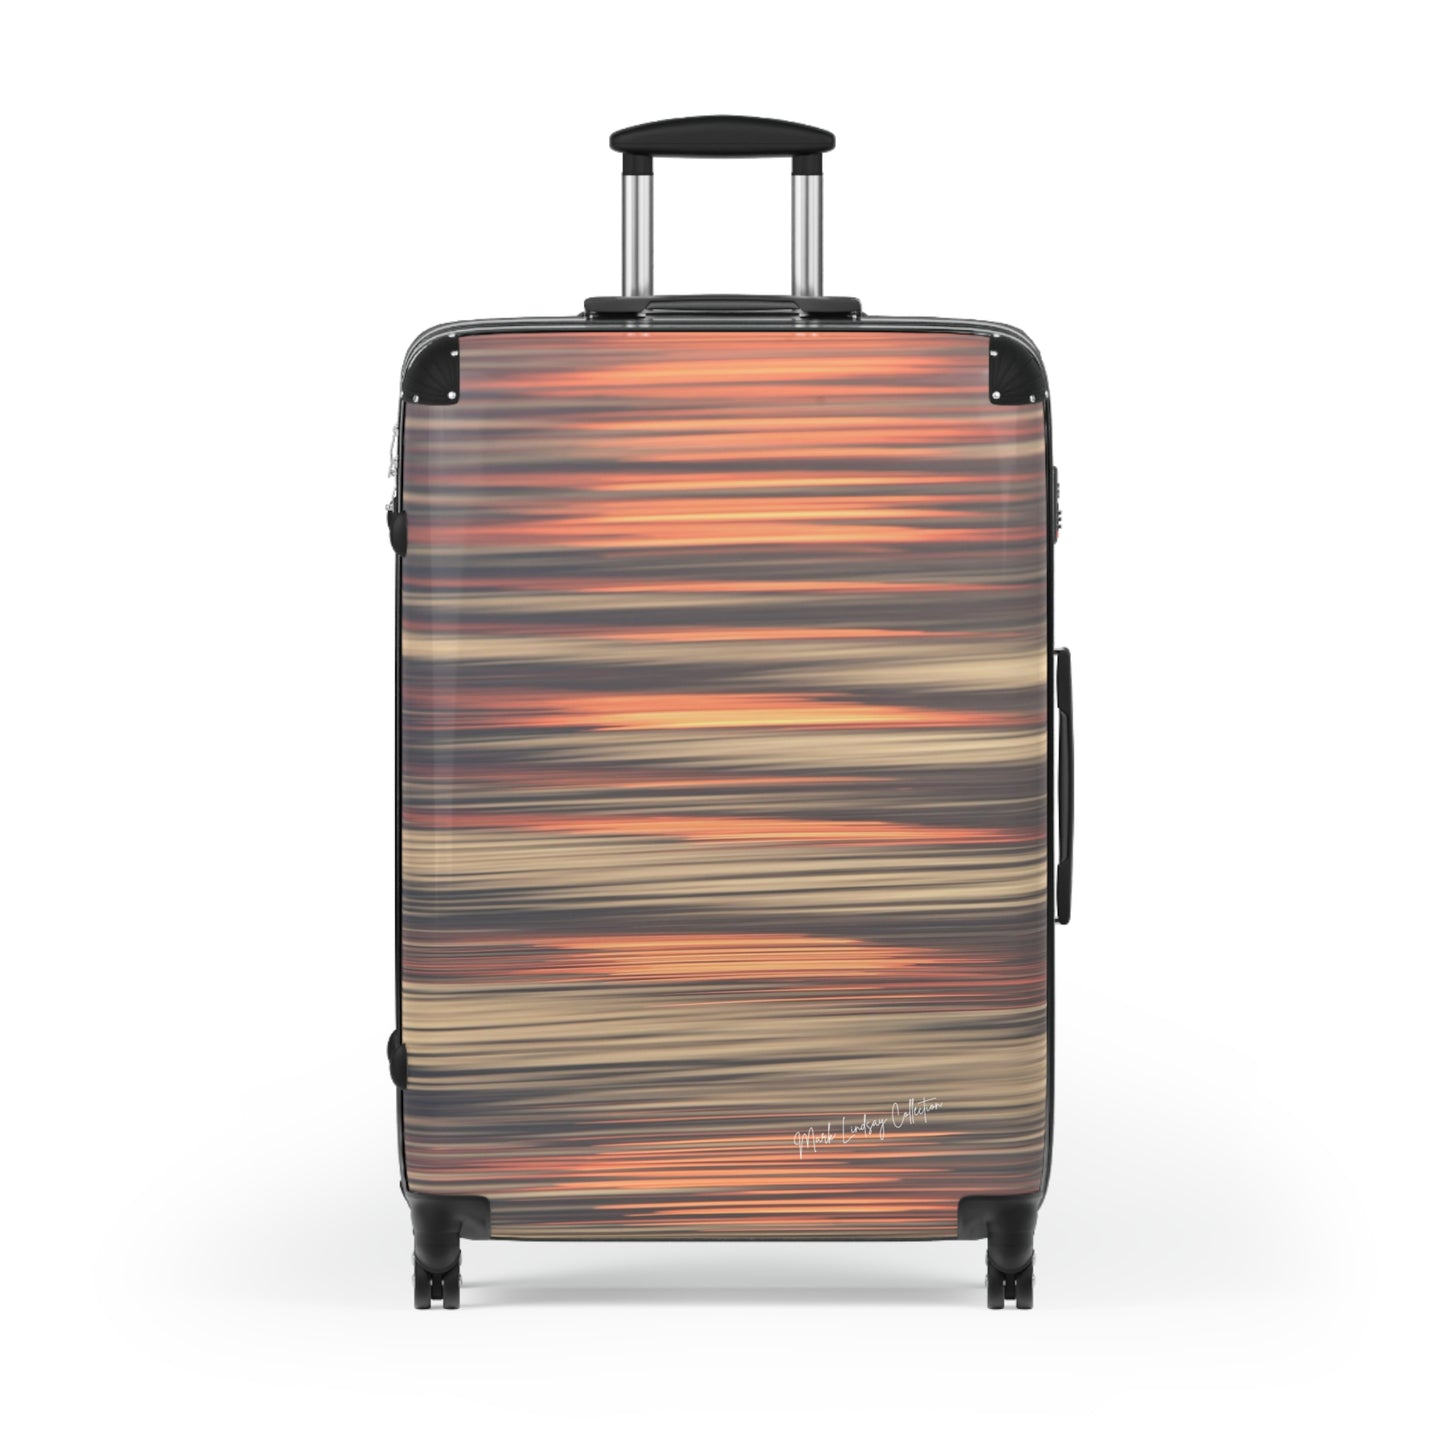 Sunset's Reflections and Ripples Custom Art Luggage